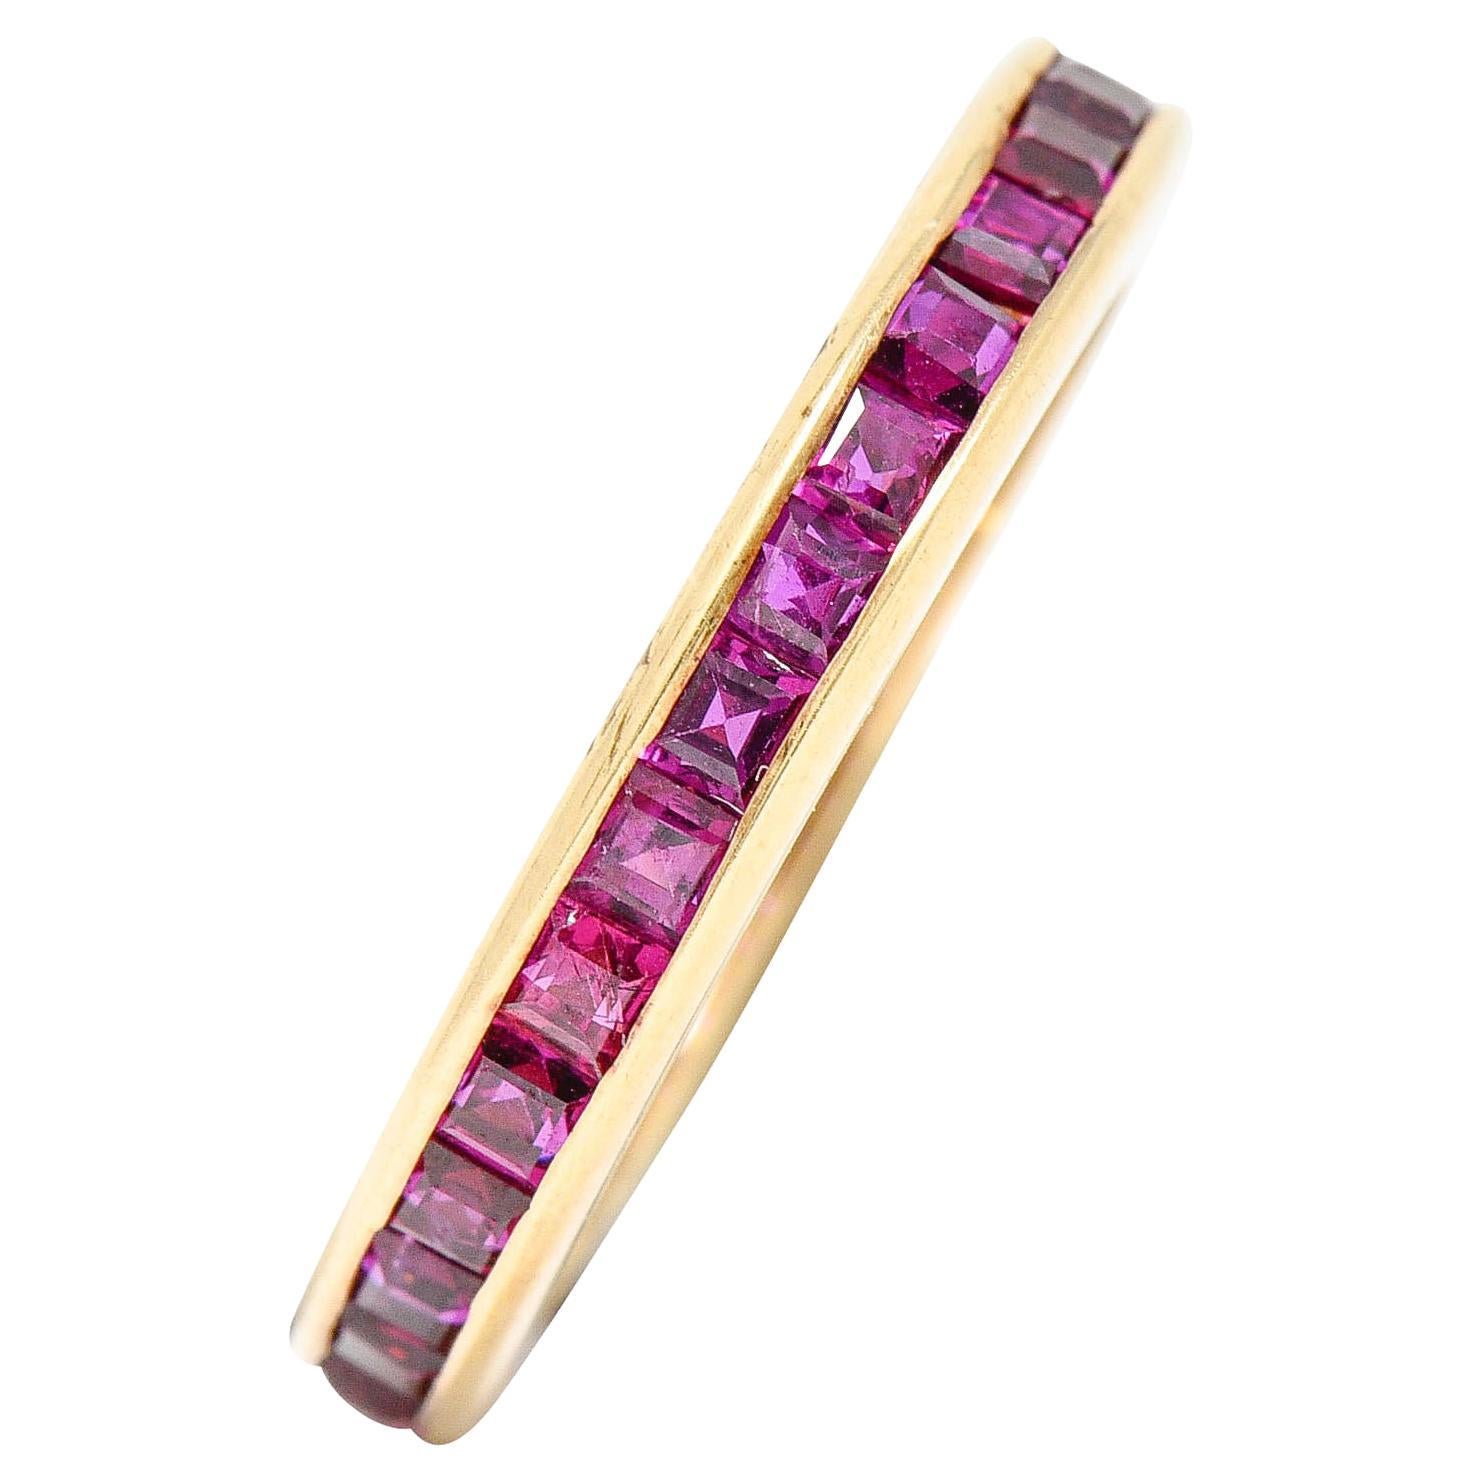 Eternity band ring is channel set fully around with square cut rubies

Very well matched purplish red color while weighing in total approximately 2.00 carats

Completed by polished gold channel walls

Tested as 14 karat gold

Circa: 1960s

Ring